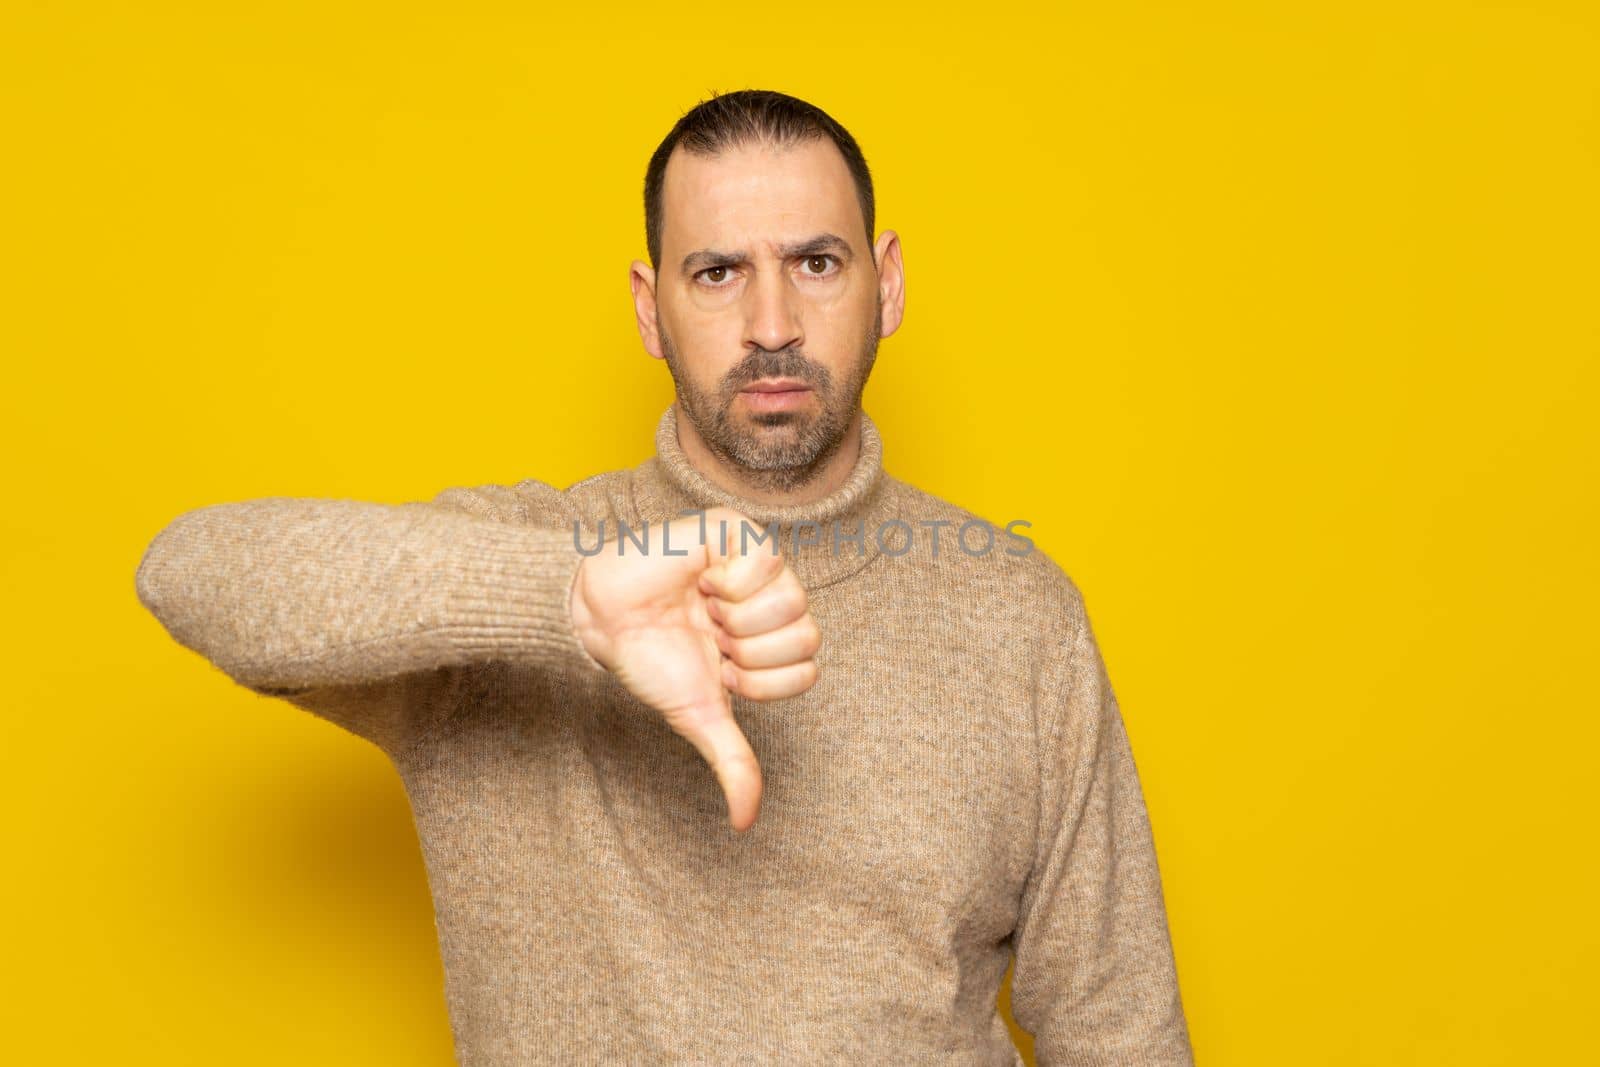 Hispanic man with a beard wearing a beige turtleneck posing with a serious expression over a yellow background has his thumbs down in disapproval. by Barriolo82